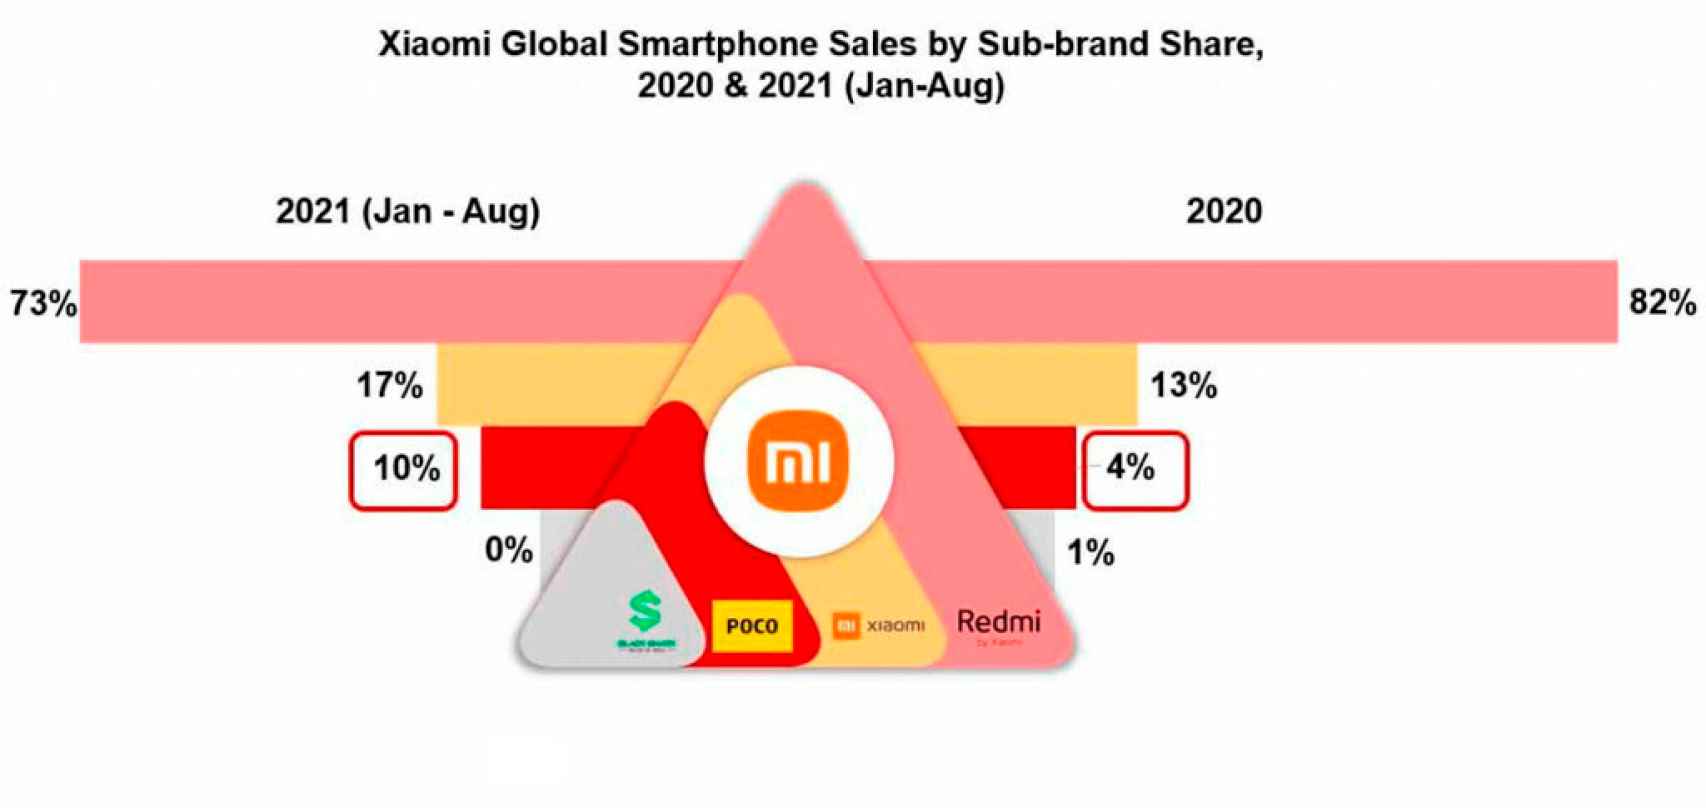 Distribution of sales within Xiaomi